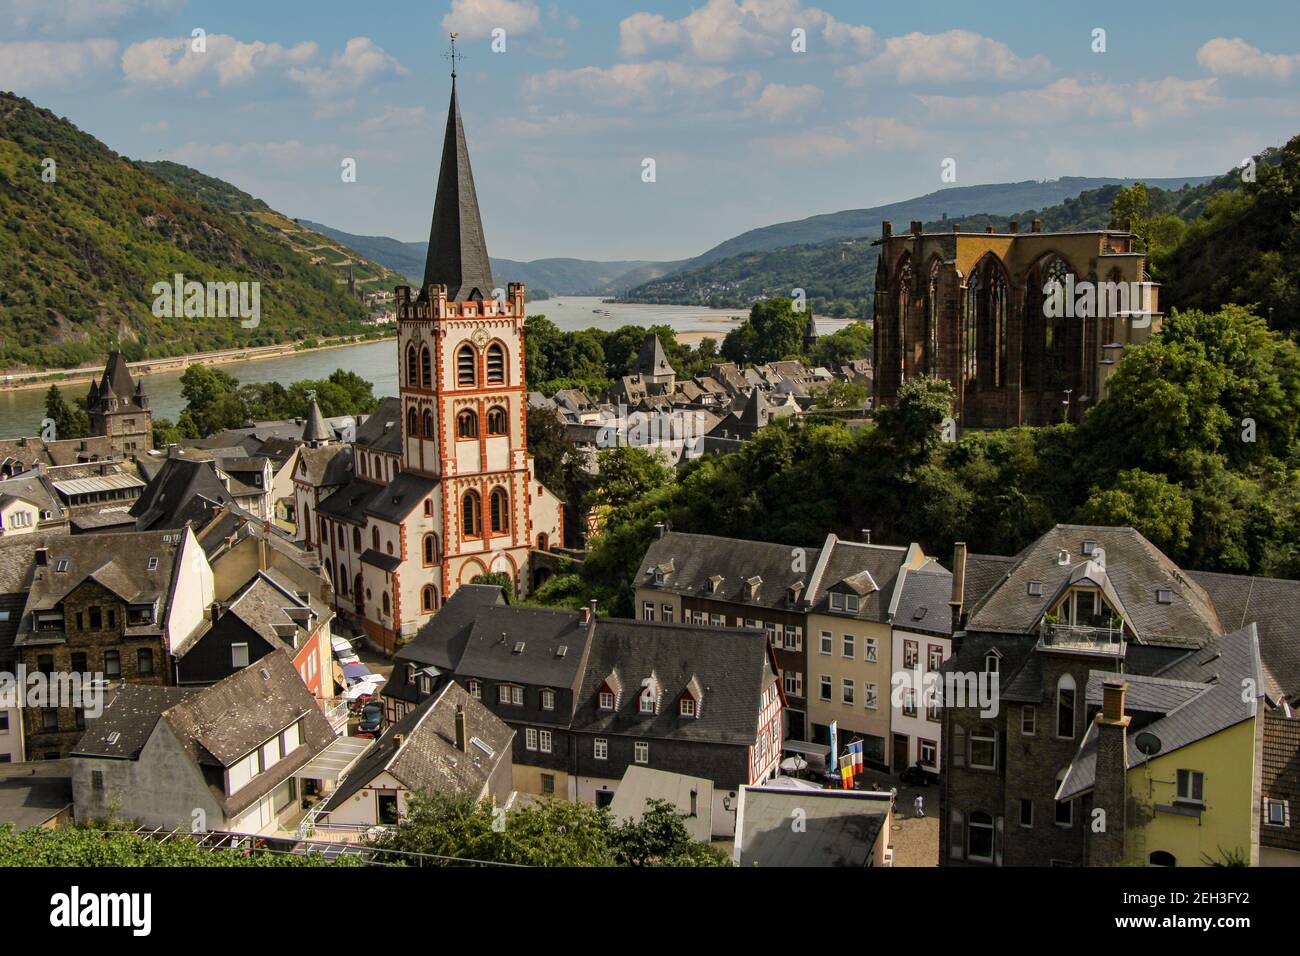 View on the village Bacharach in the Rhine Valley in Germany Stock Photo